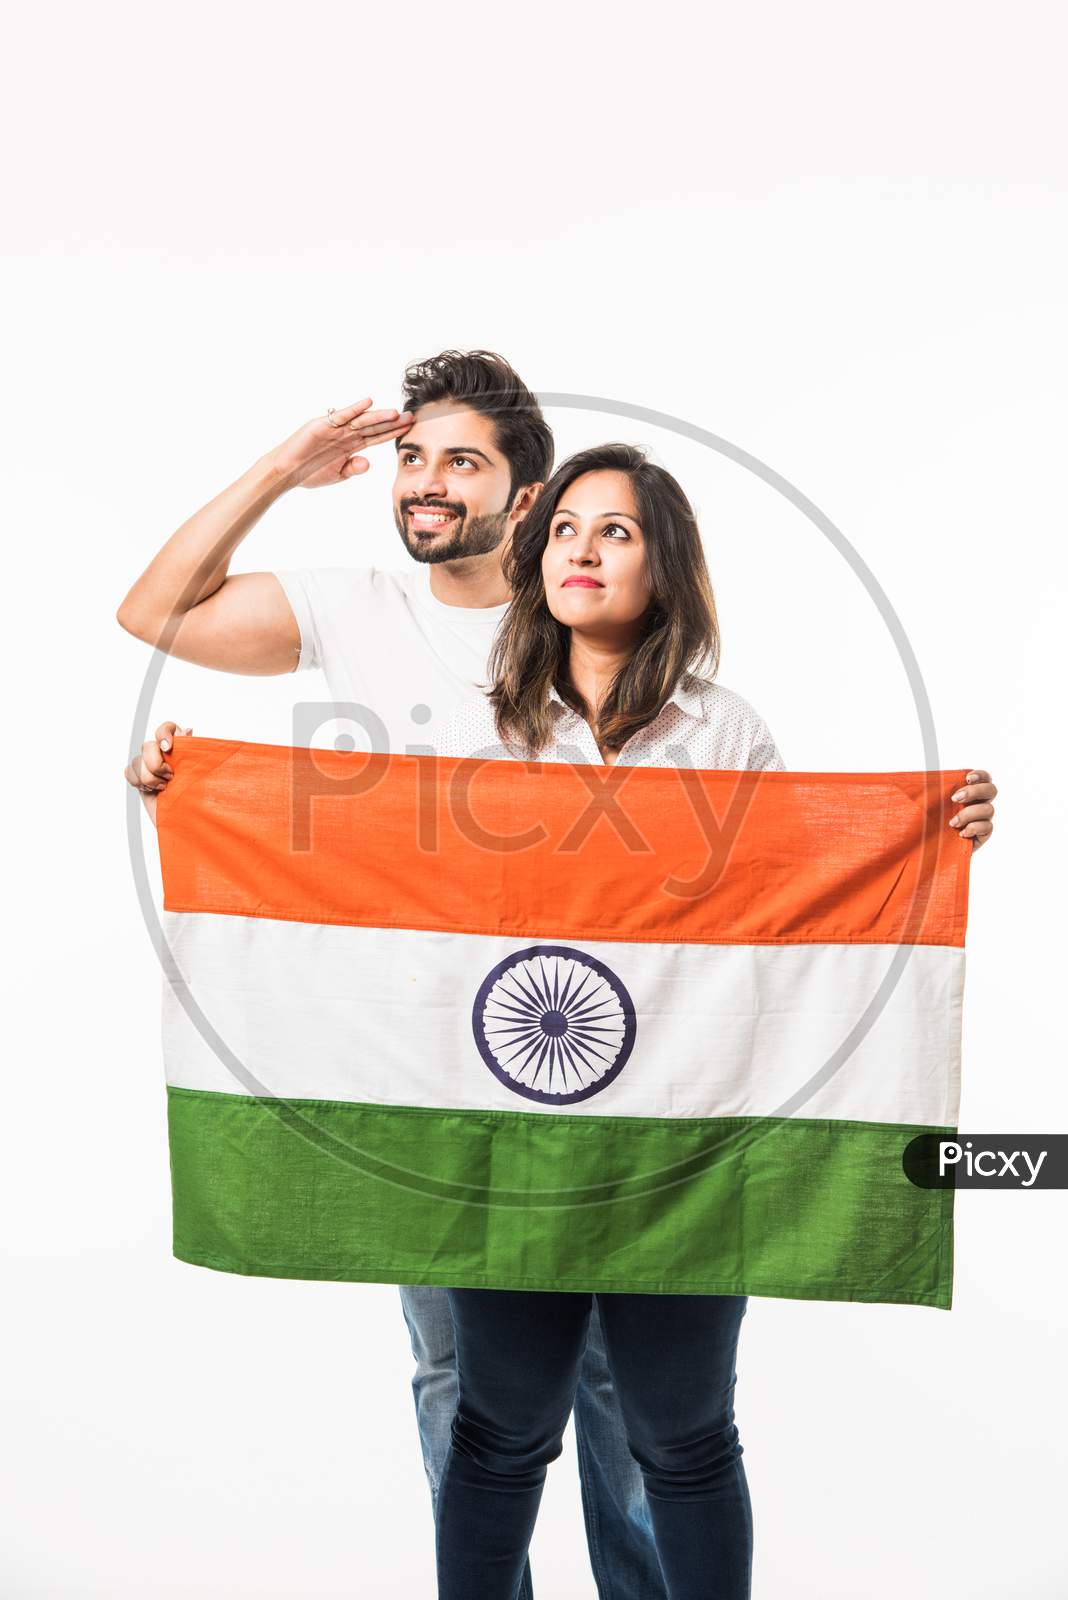 Young Couple holding Indian Flag on Independence or republic day, standing isolated over white background. selective focus